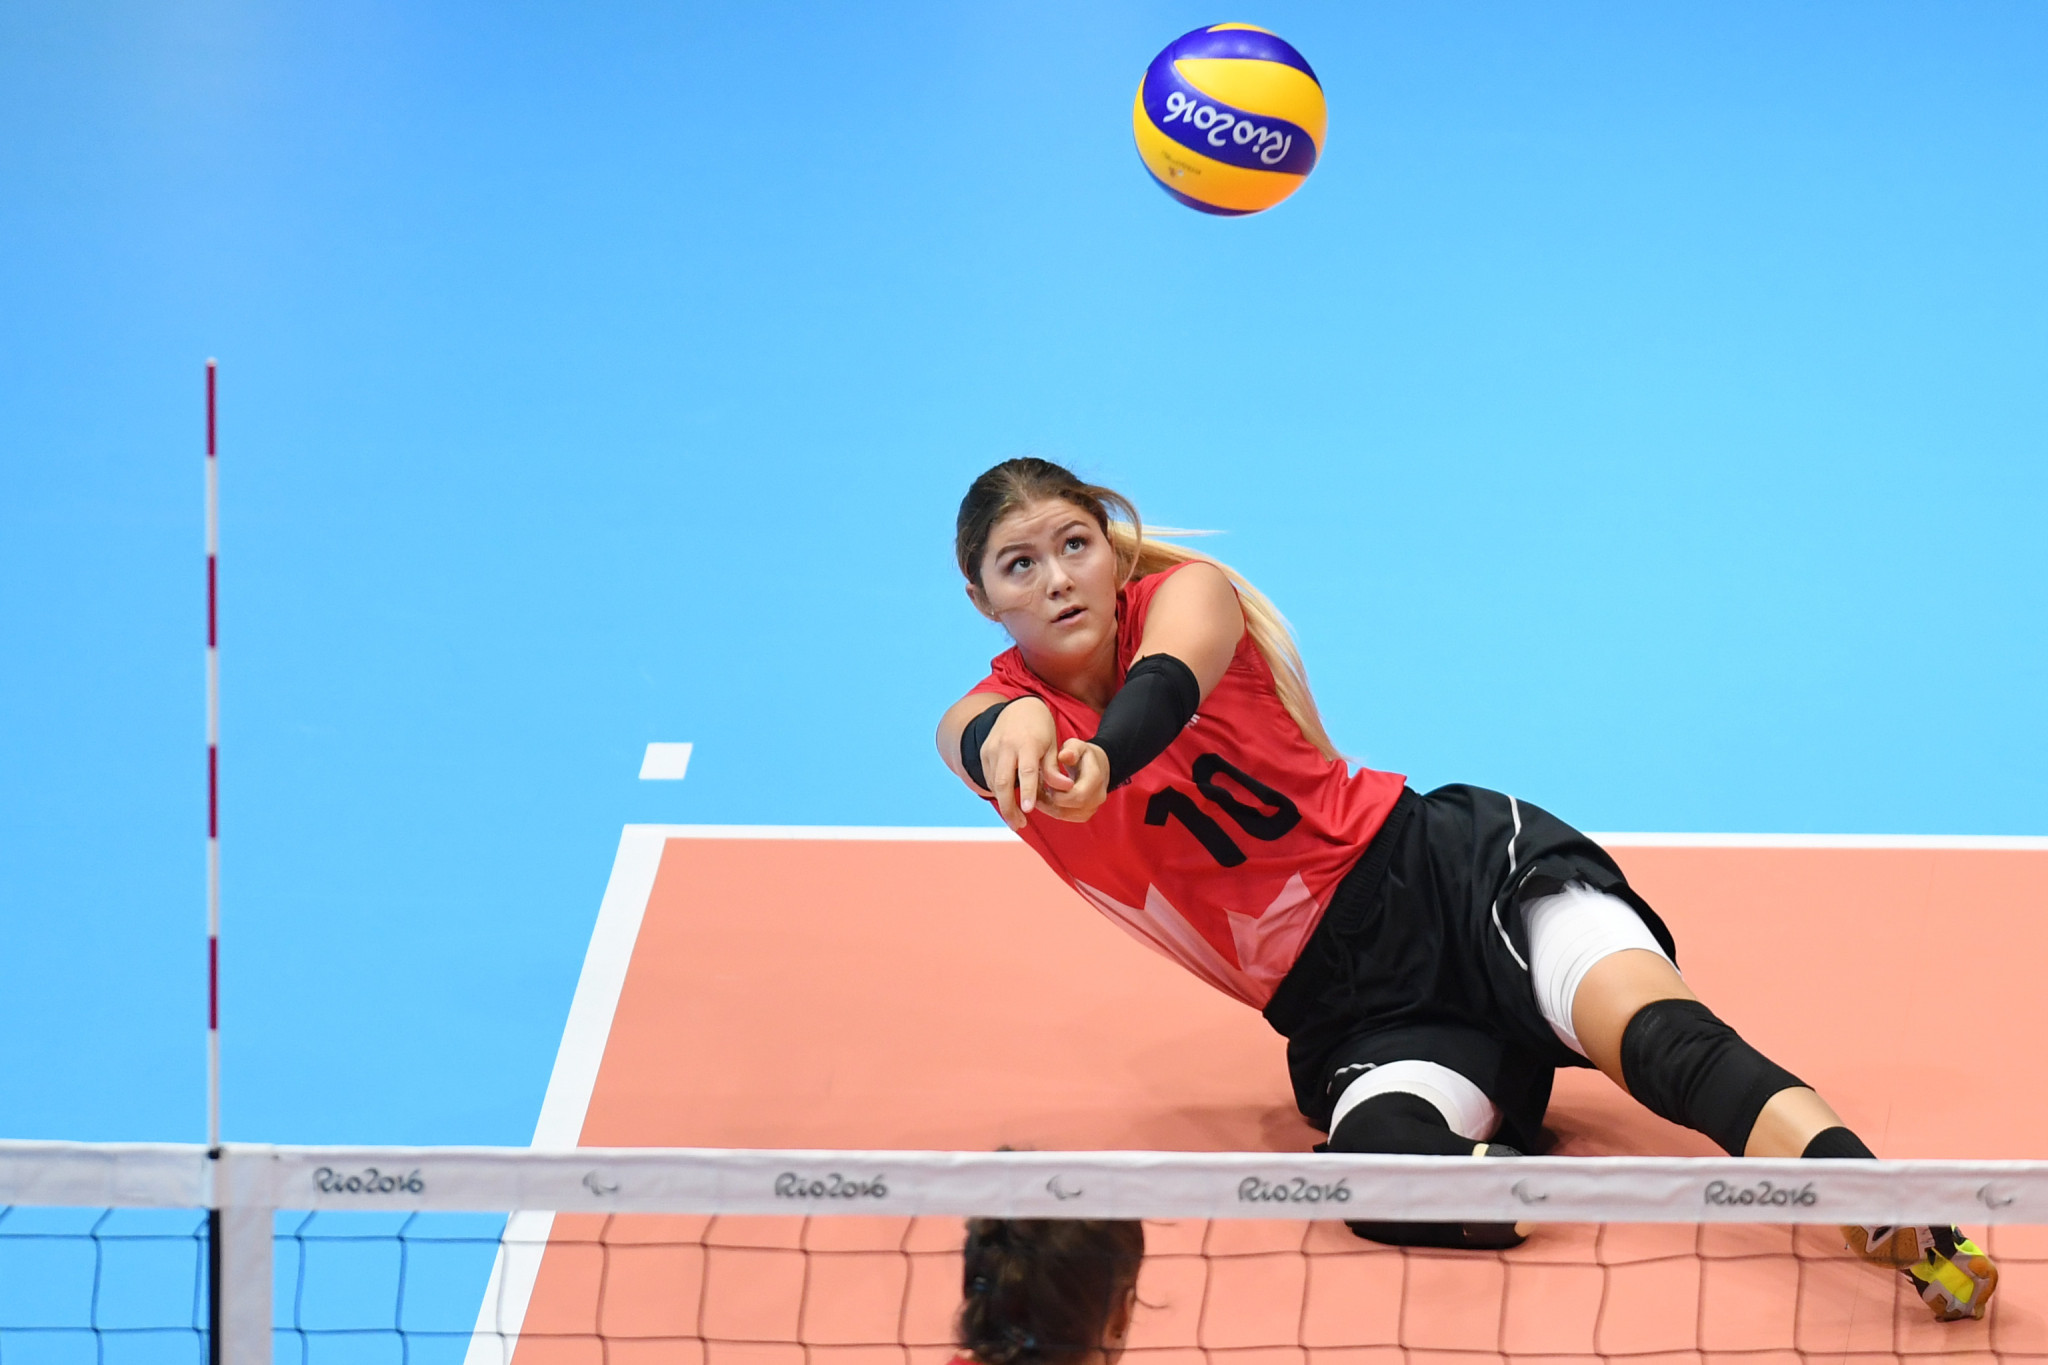 Sitting volleyball has been a Paralympic discipline since 1980 ©Getty Images